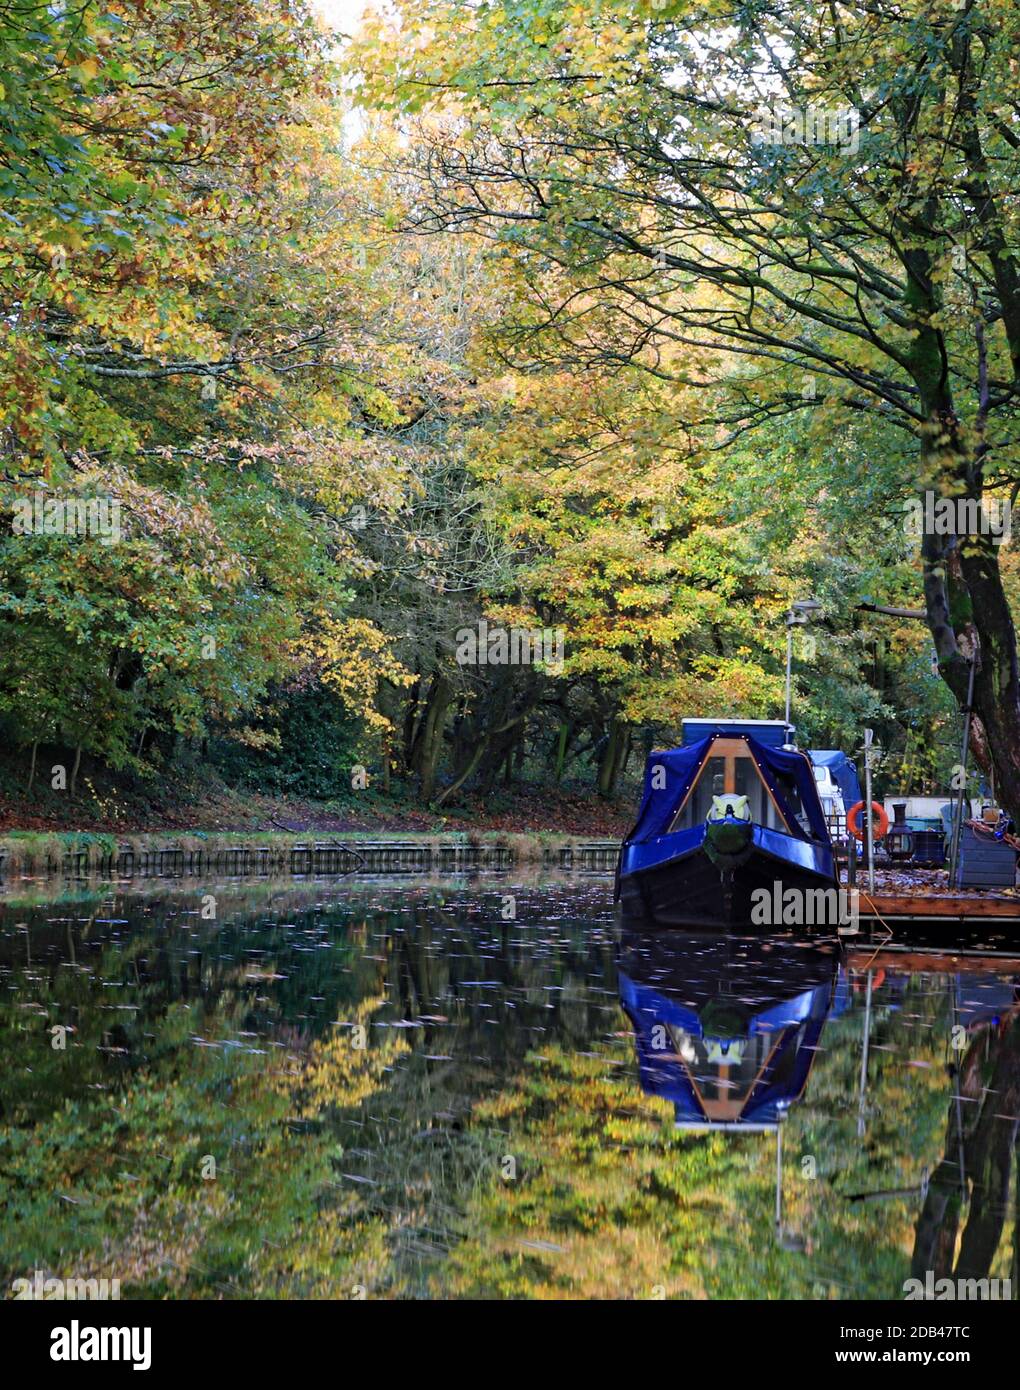 The autumn leaves are falling onto the reflected moored boats and trees into the waters of the Leeds and Liverpool near Adlington in Lancashire. Stock Photo